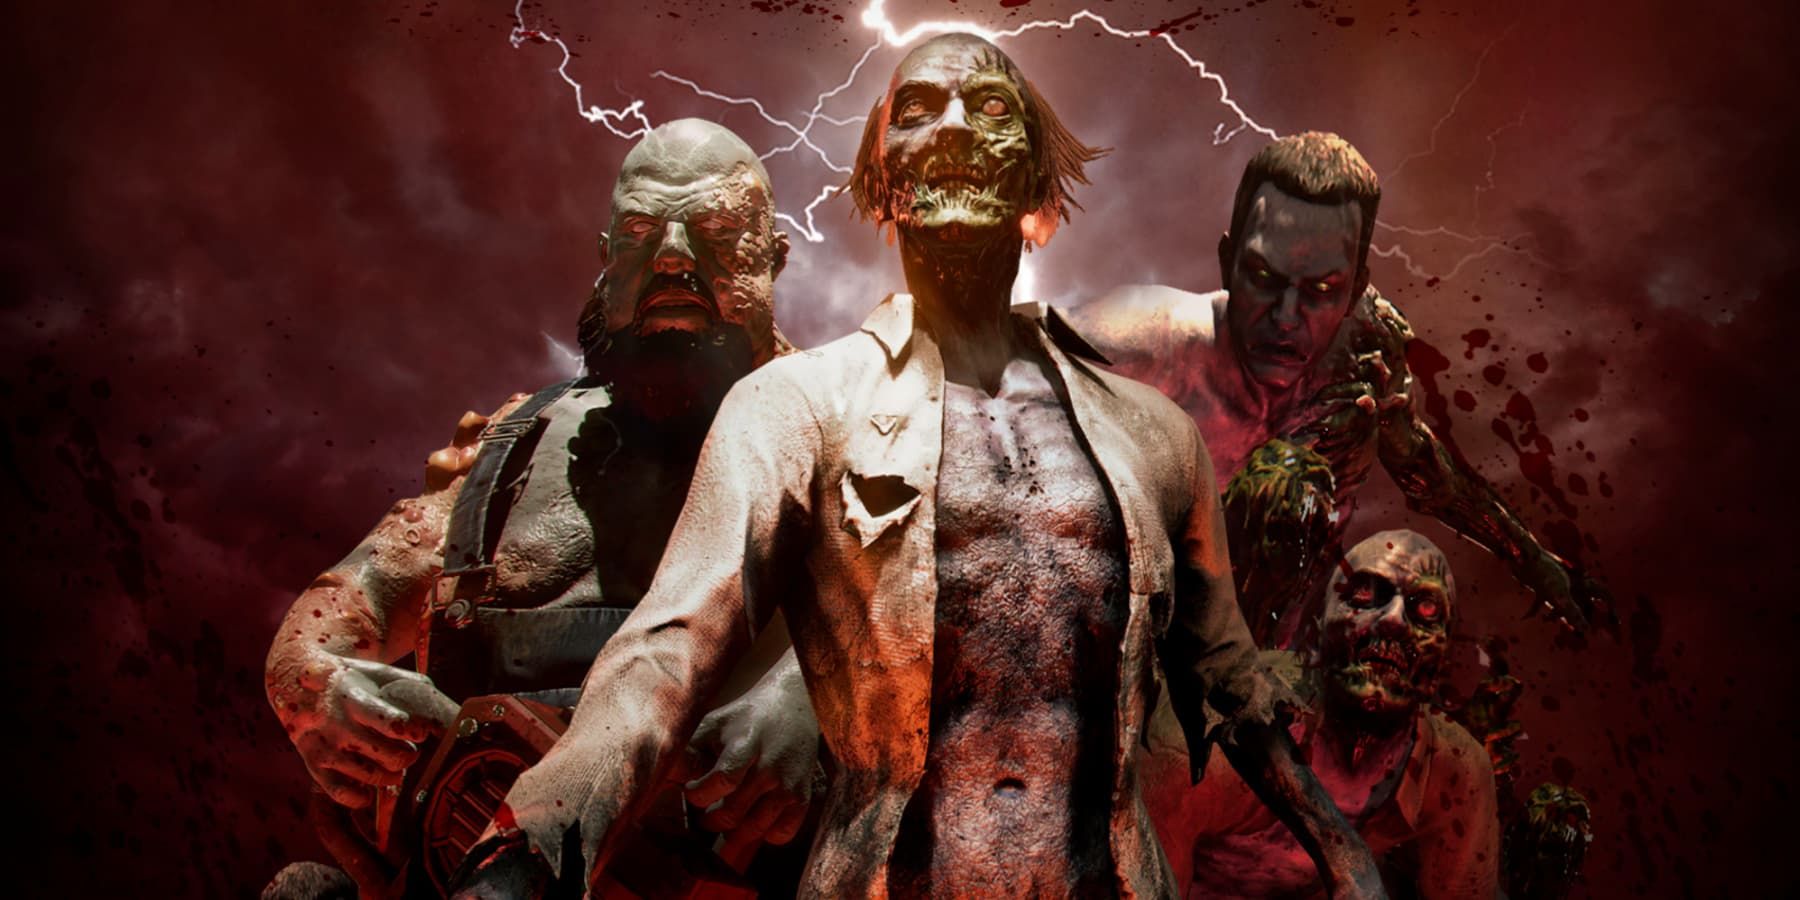 zombies from the game house of the dead remake on ps5